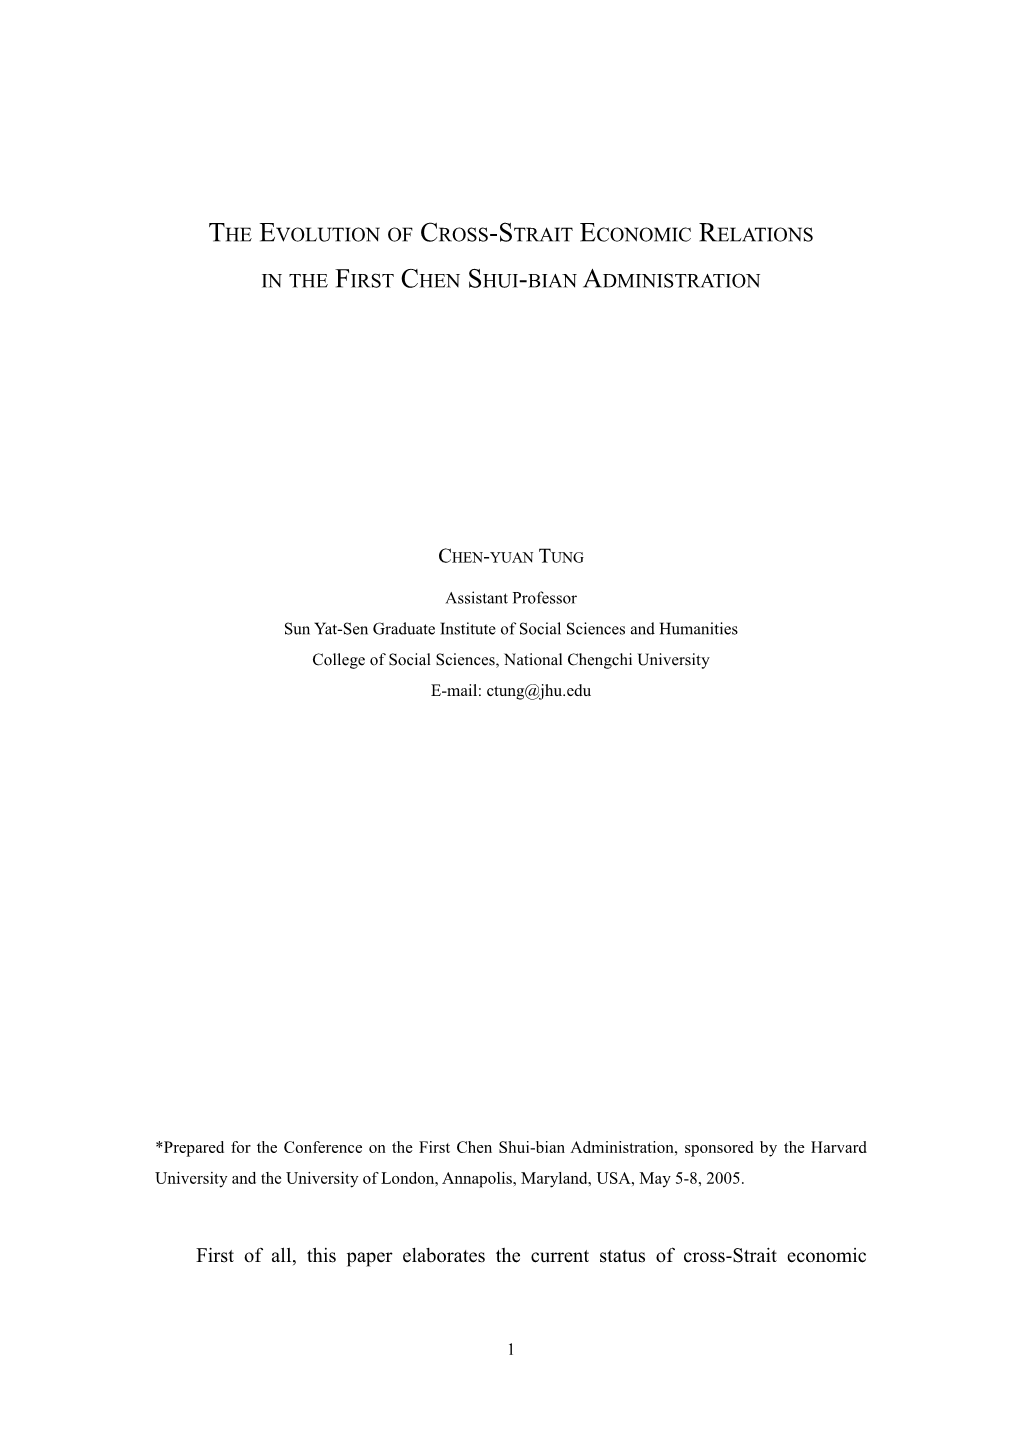 The Evolution of Cross-Strait Economic Relations in the First Chen Shui-Bian Administration